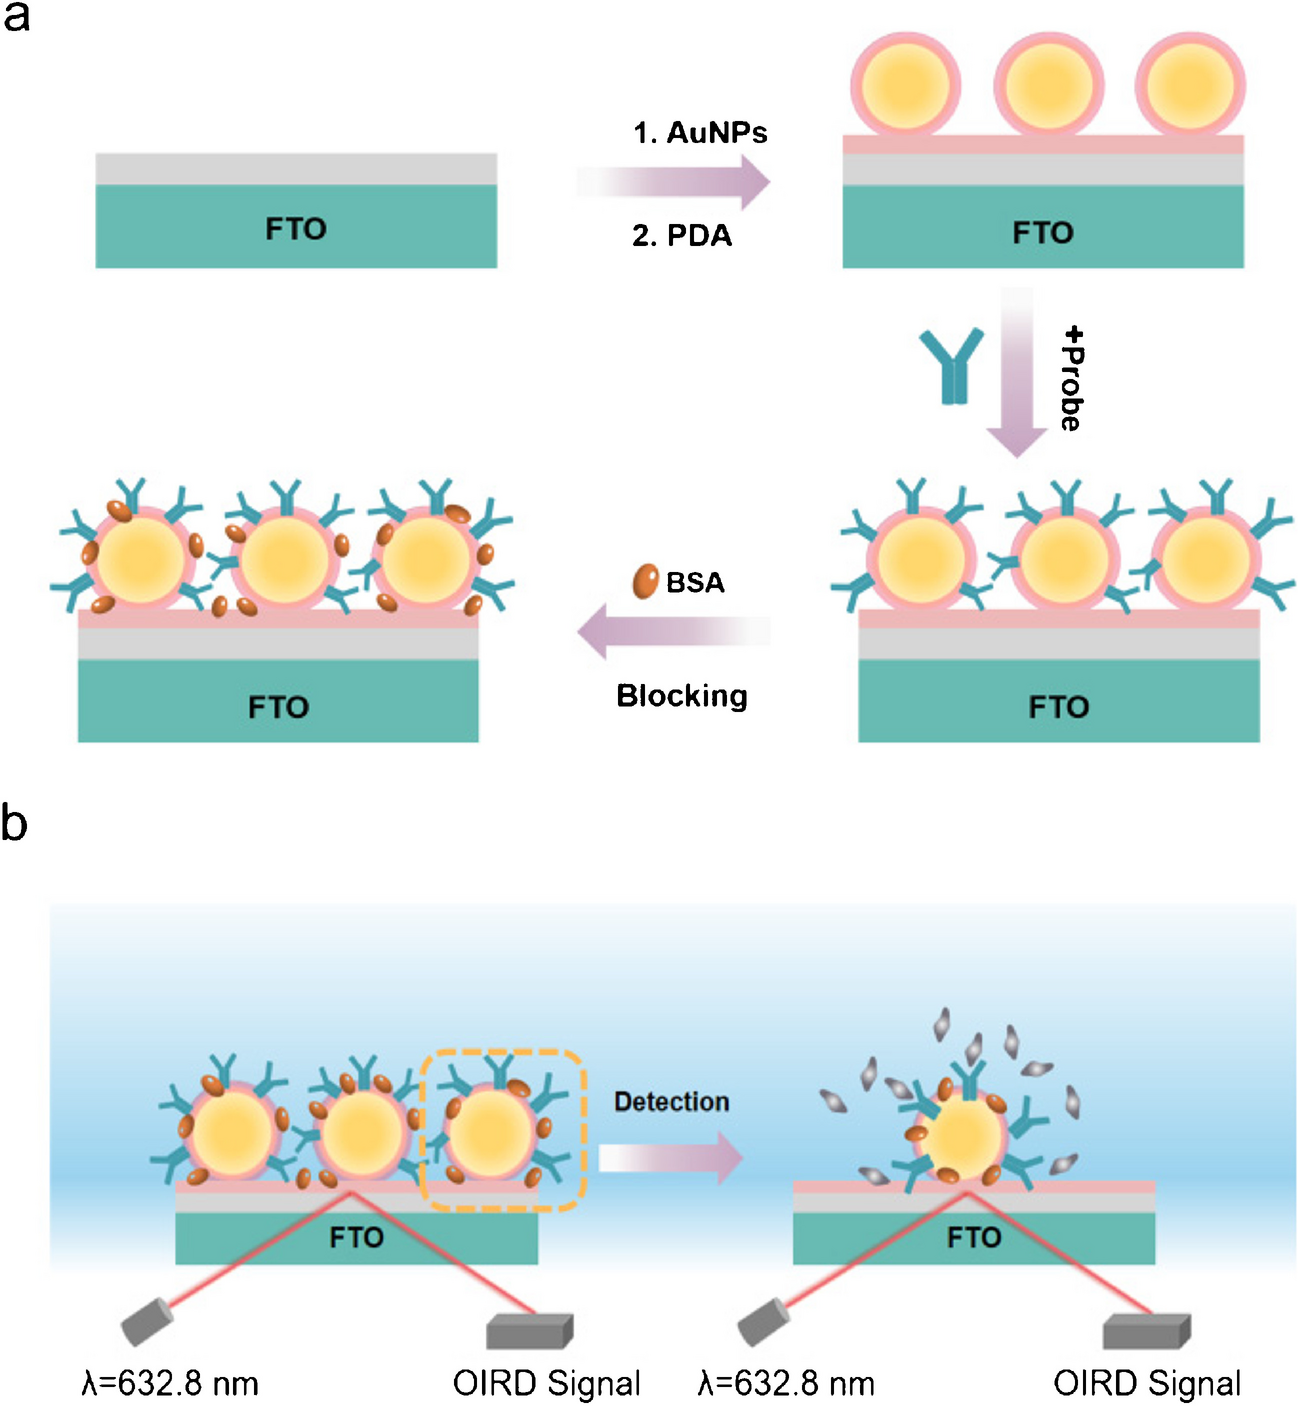 Gold nanoparticle-decorated fluorine-doped tin oxide substrate for sensitive label-free OIRD microarray chips